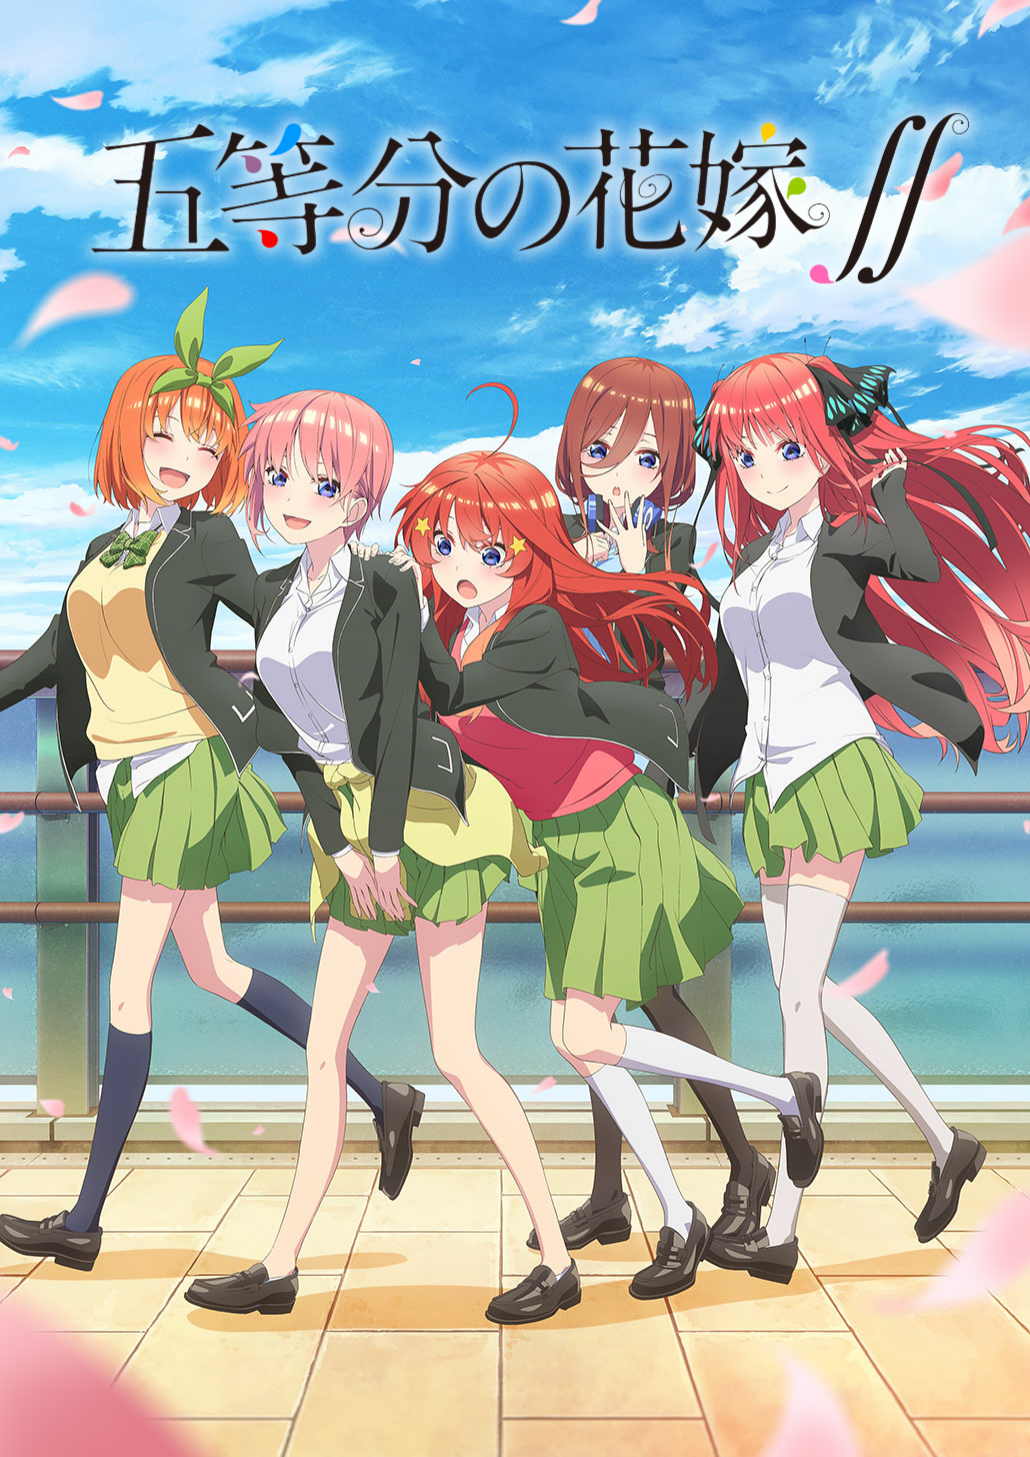 The Quintessential Quintuplets season two anime poster. 